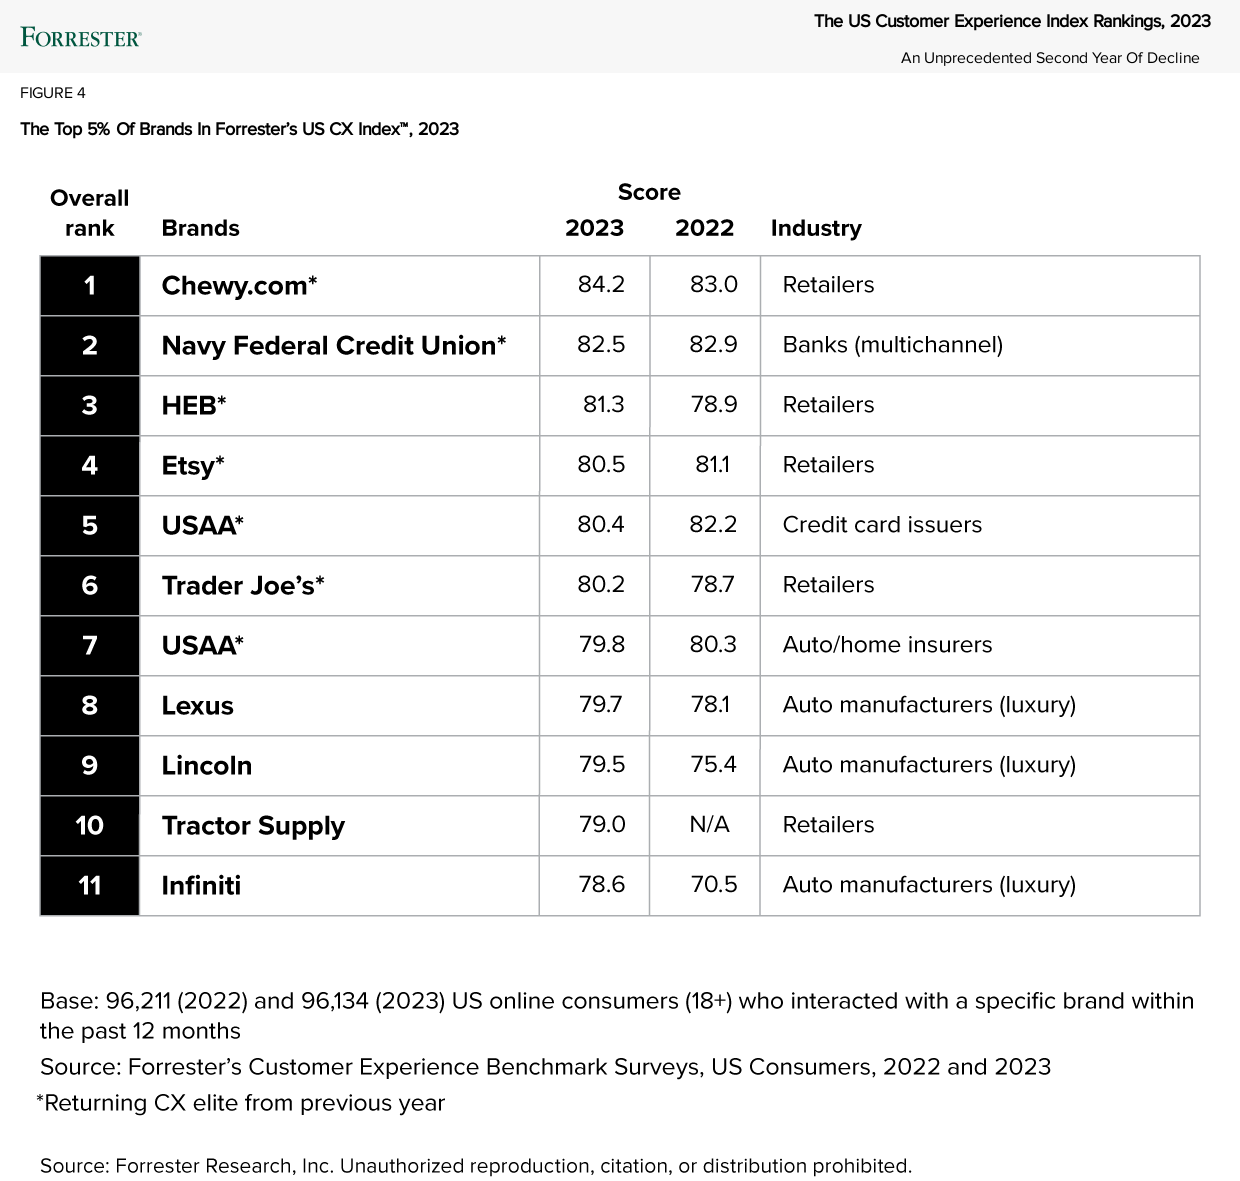 Conducted for the eighth year in a row, Forrester’s Customer Experience Benchmark Survey, which collects data to calculate Forrester CX Index scores, is based on more than 96,000 US customers across 221 brands and 13 industries. Here is the 2023 list of elite brands — the top 5% of brands in the entire CX Index.